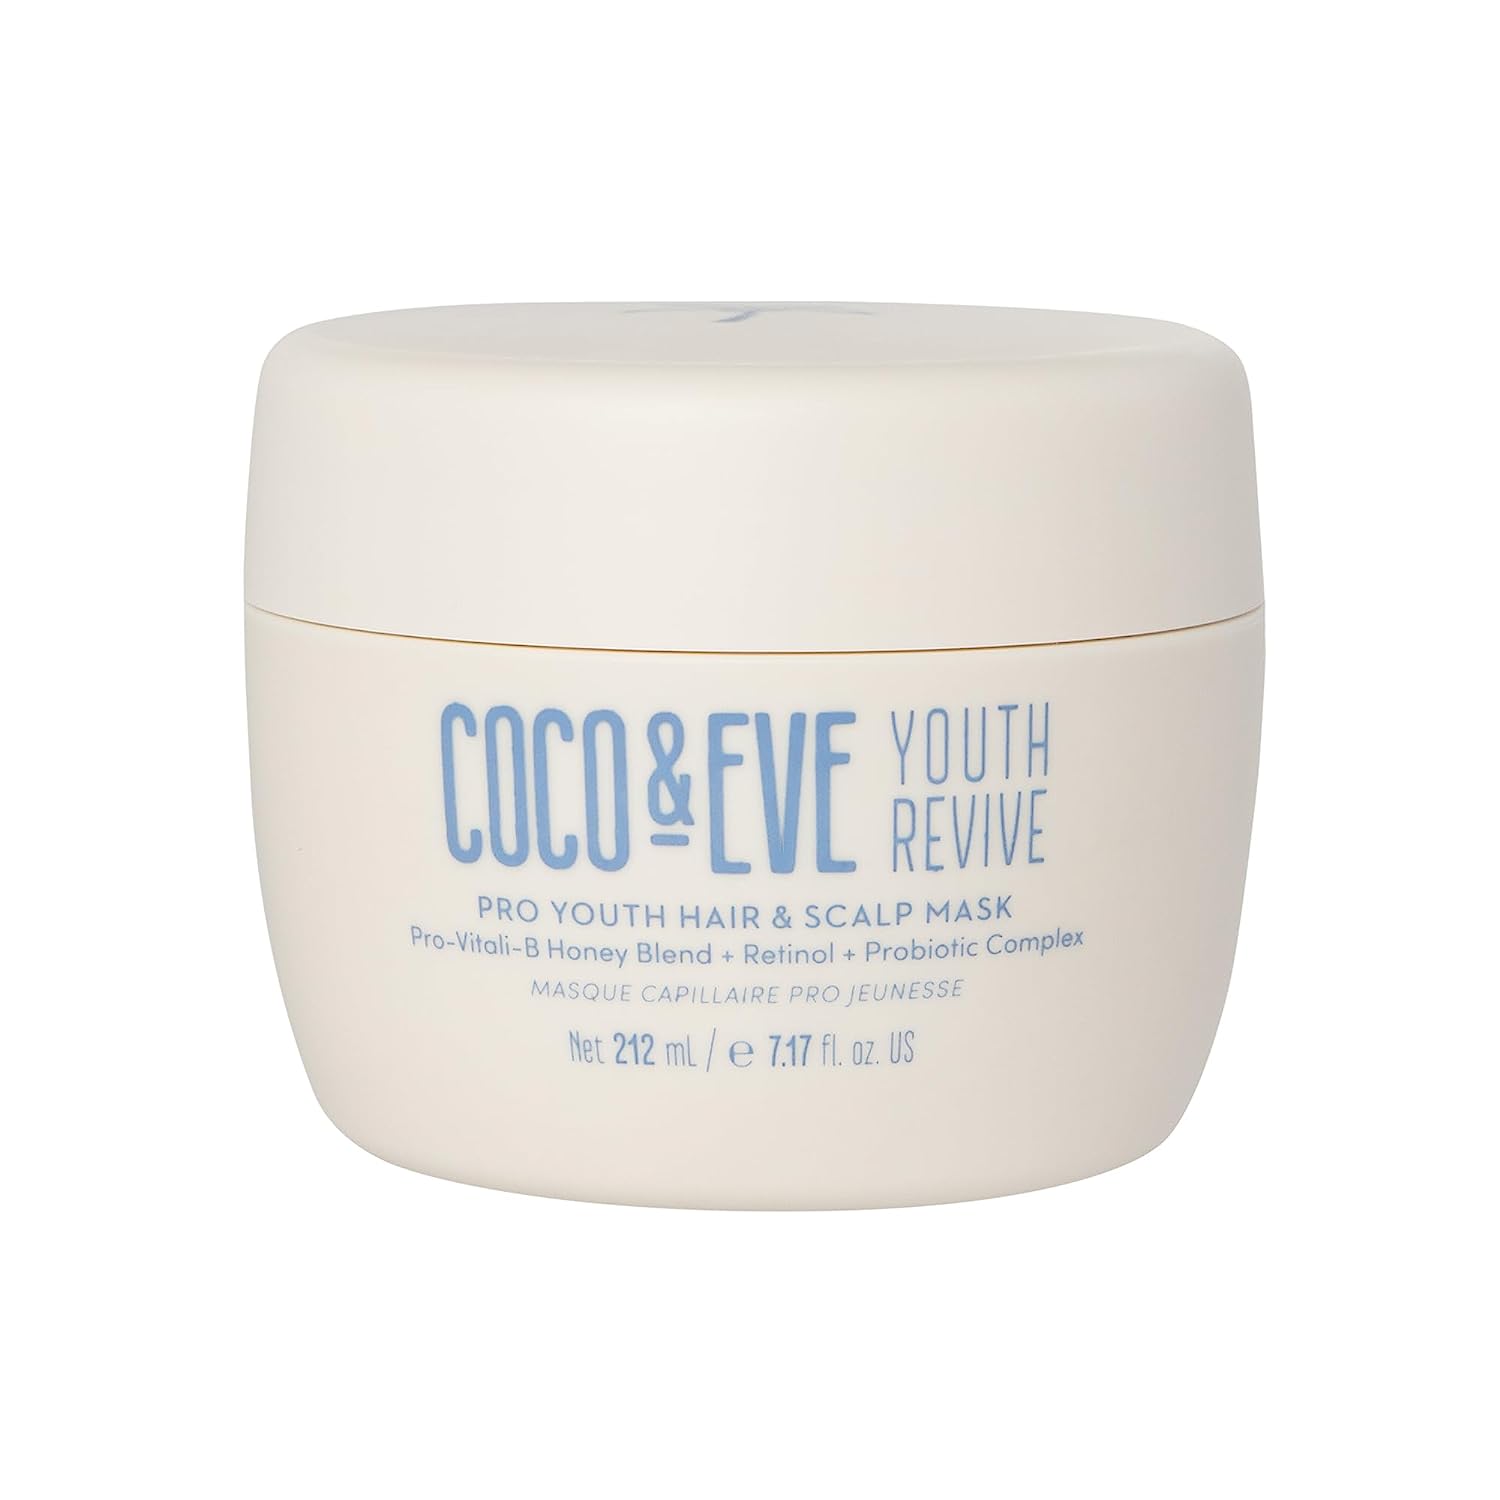 Coco & Eve Youth Revive Hair & Scalp Mask